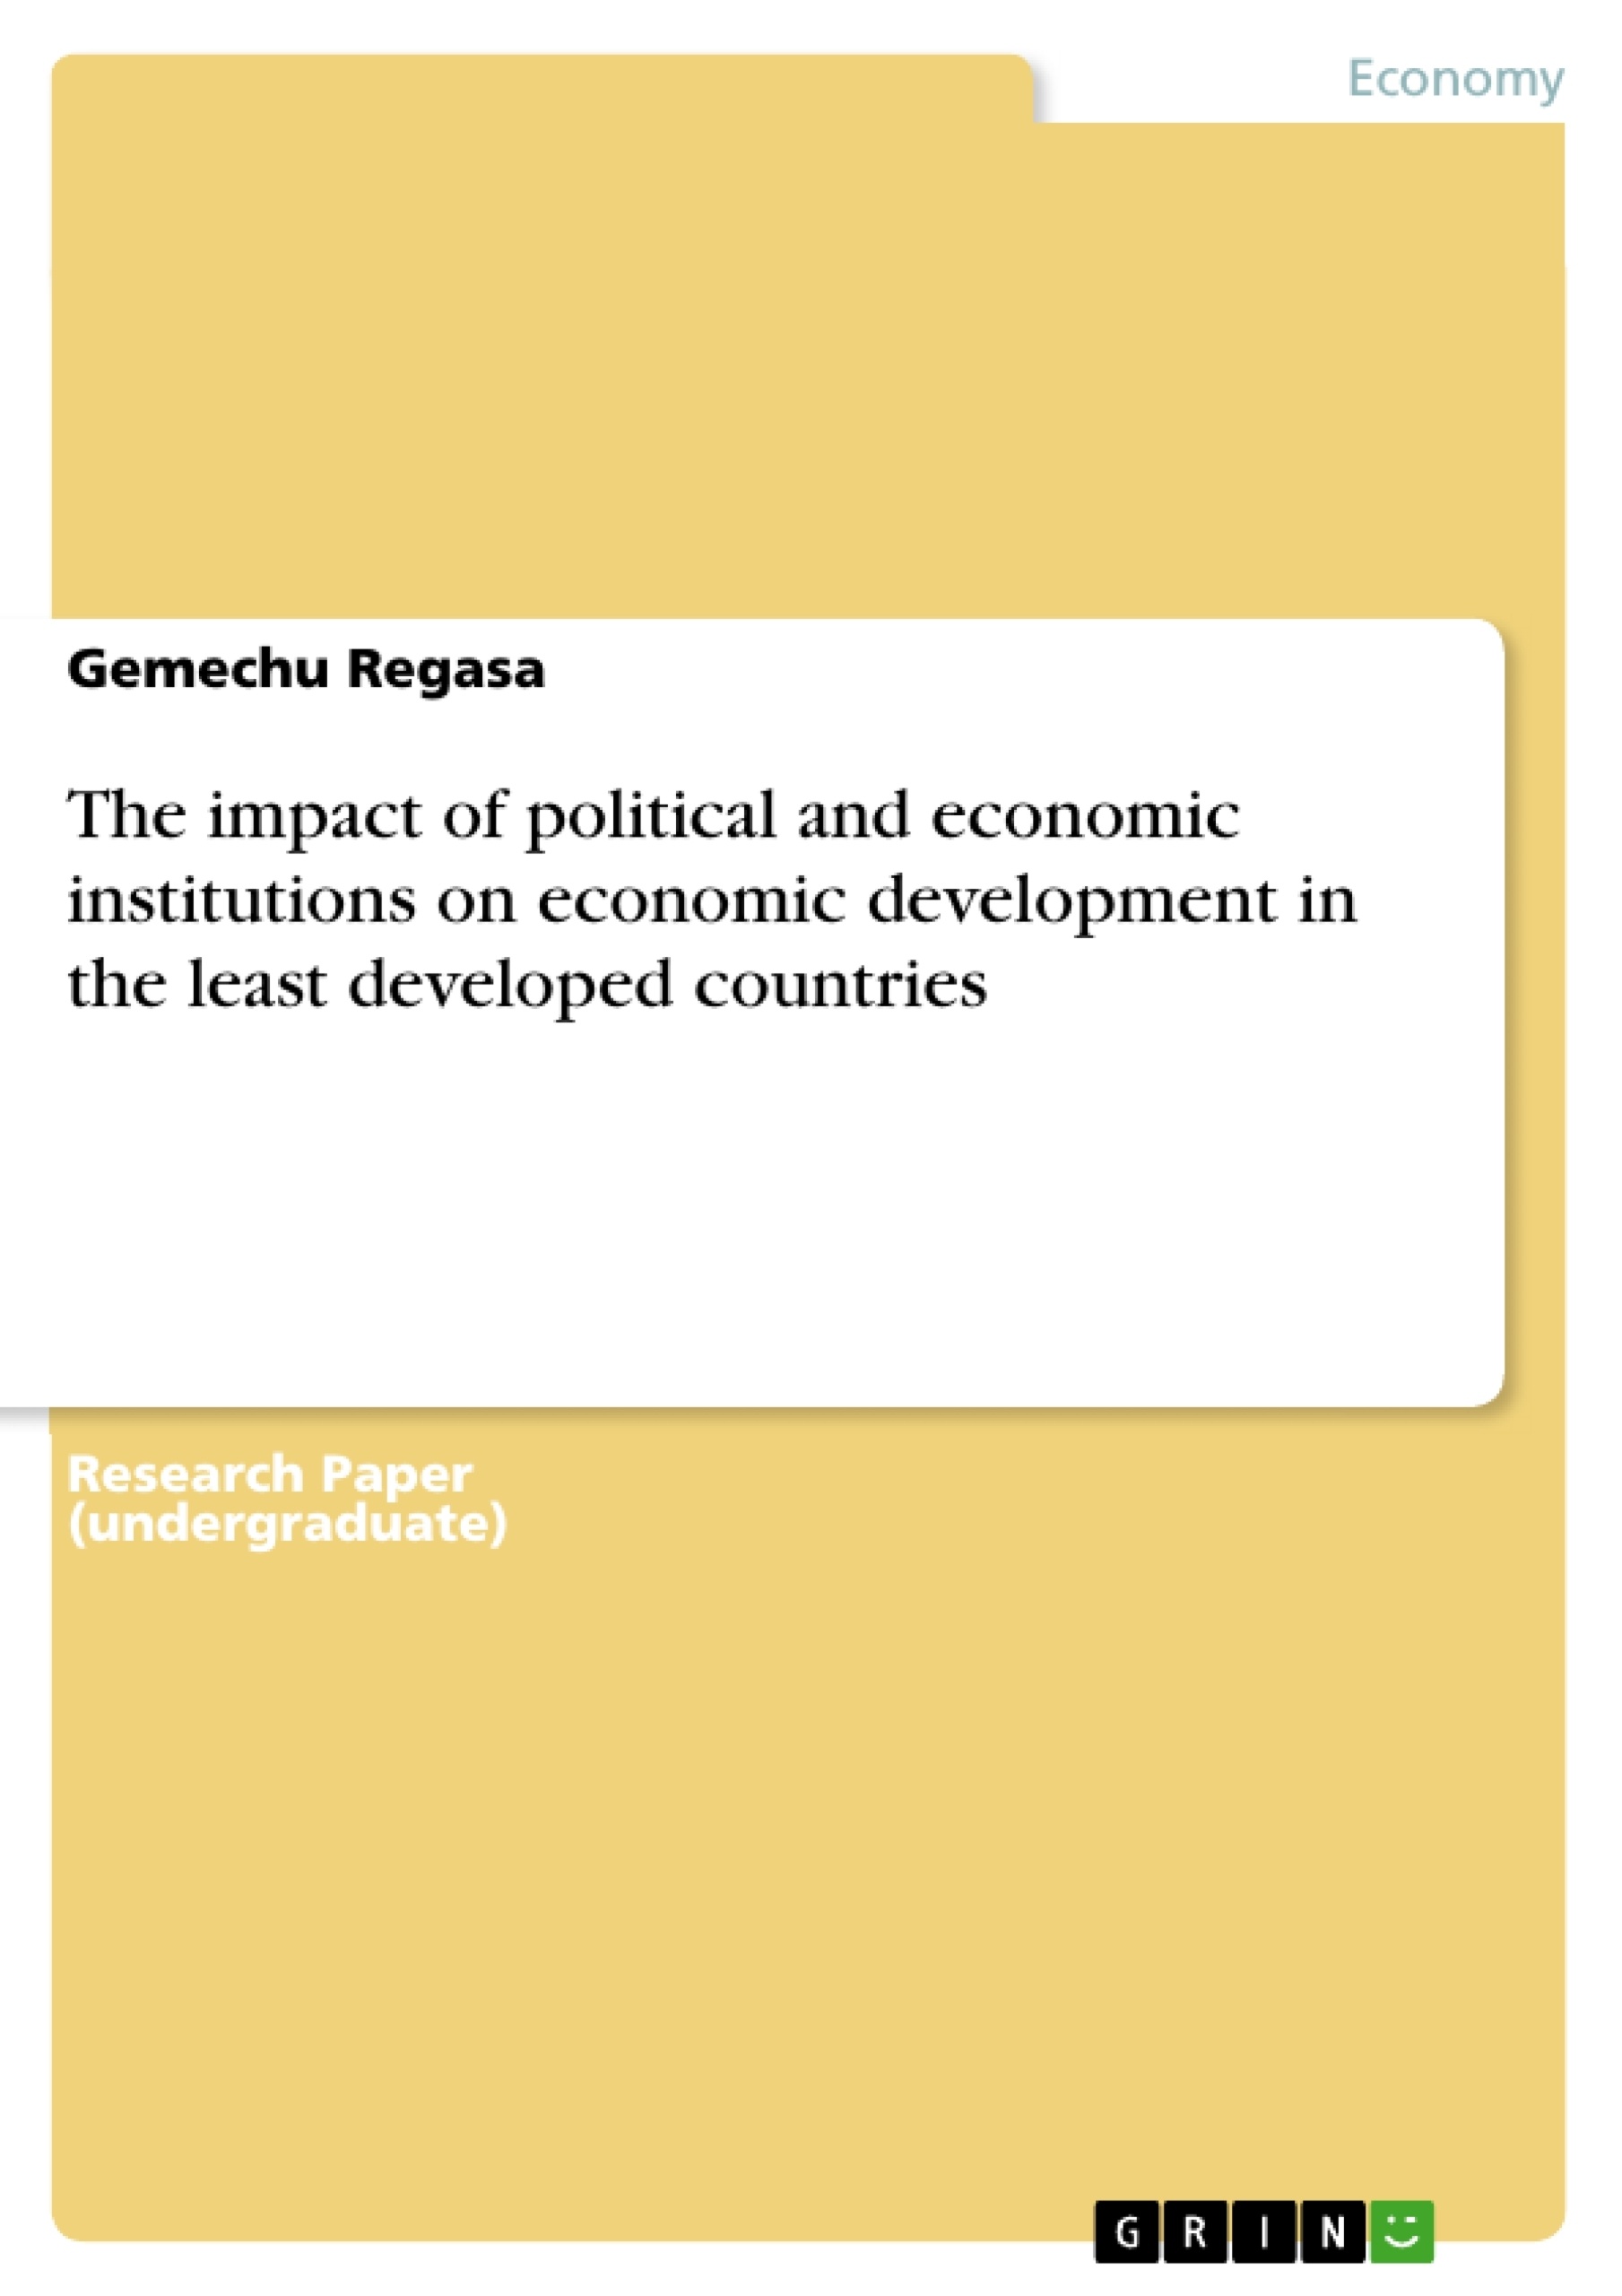 Title: The impact of political and economic institutions on economic development in the least developed countries